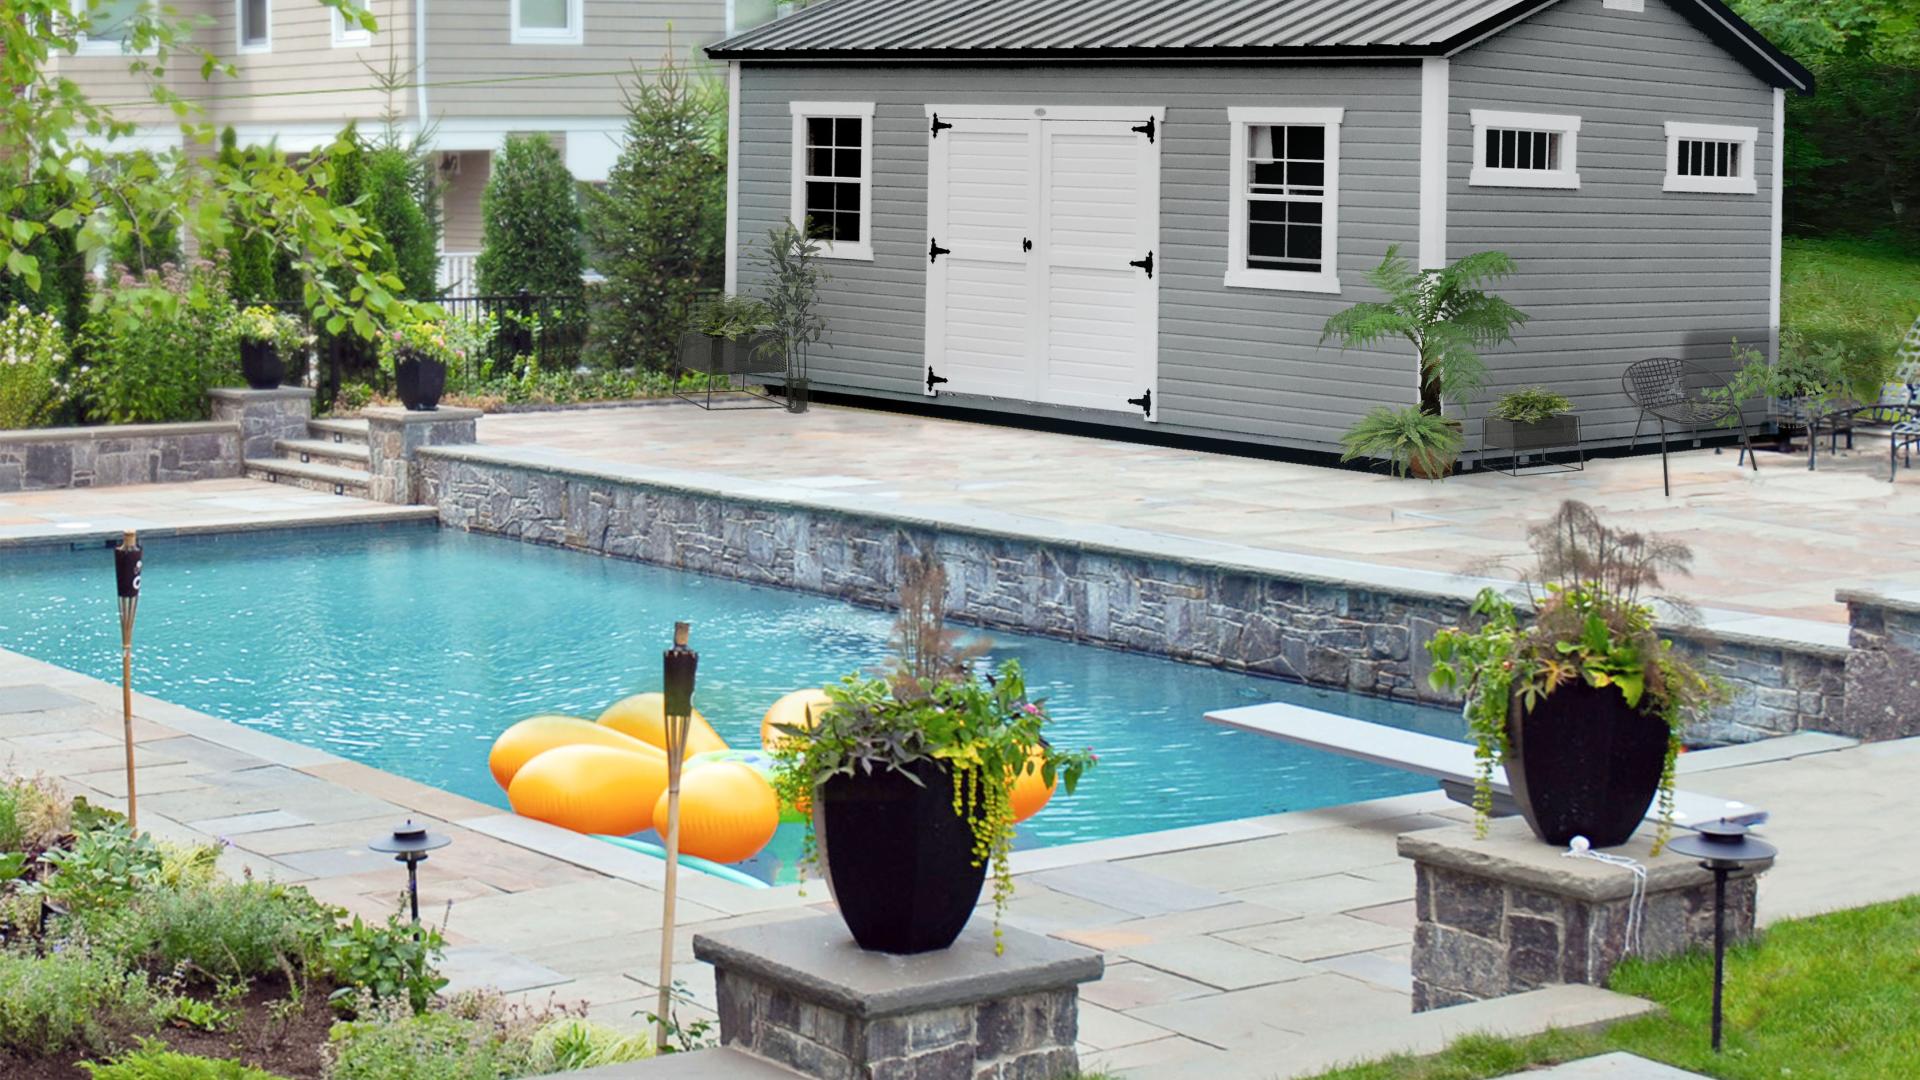 How to Store Pool Equipment Over the Winter